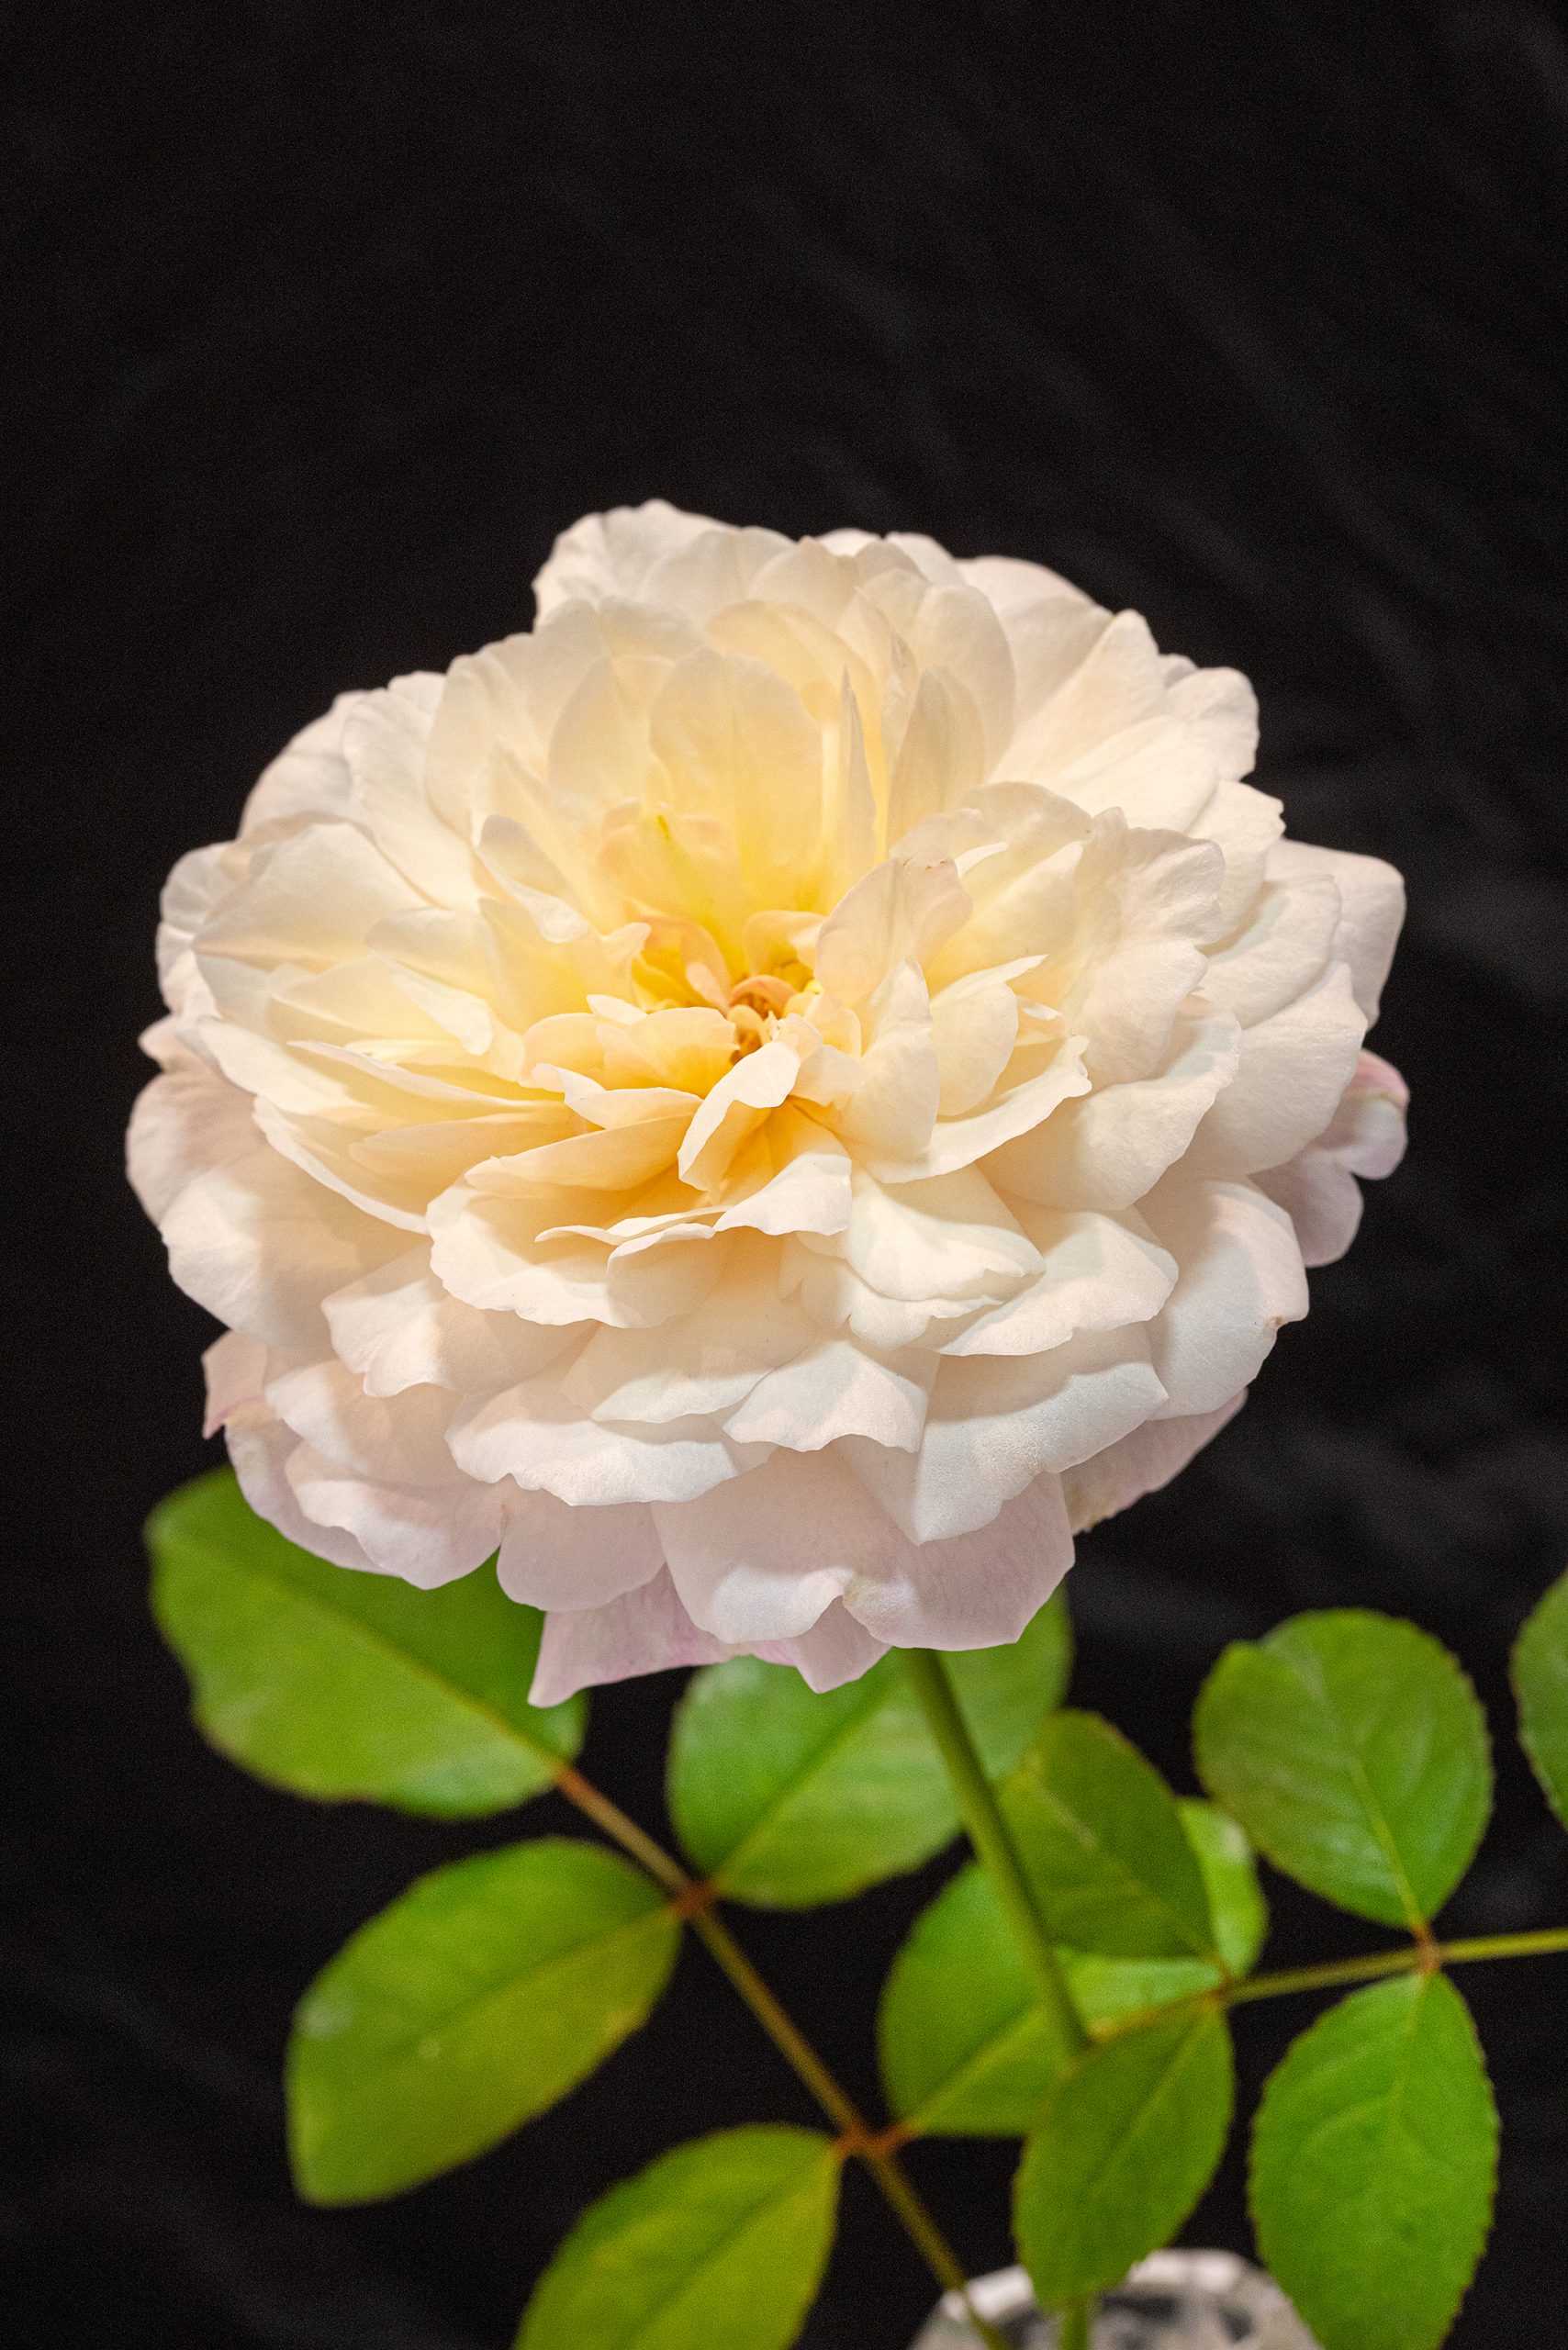 The ‘Coquette Des Blanches’ rose won the most blue ribbons this past year; grown by the Governor’s Mansion.